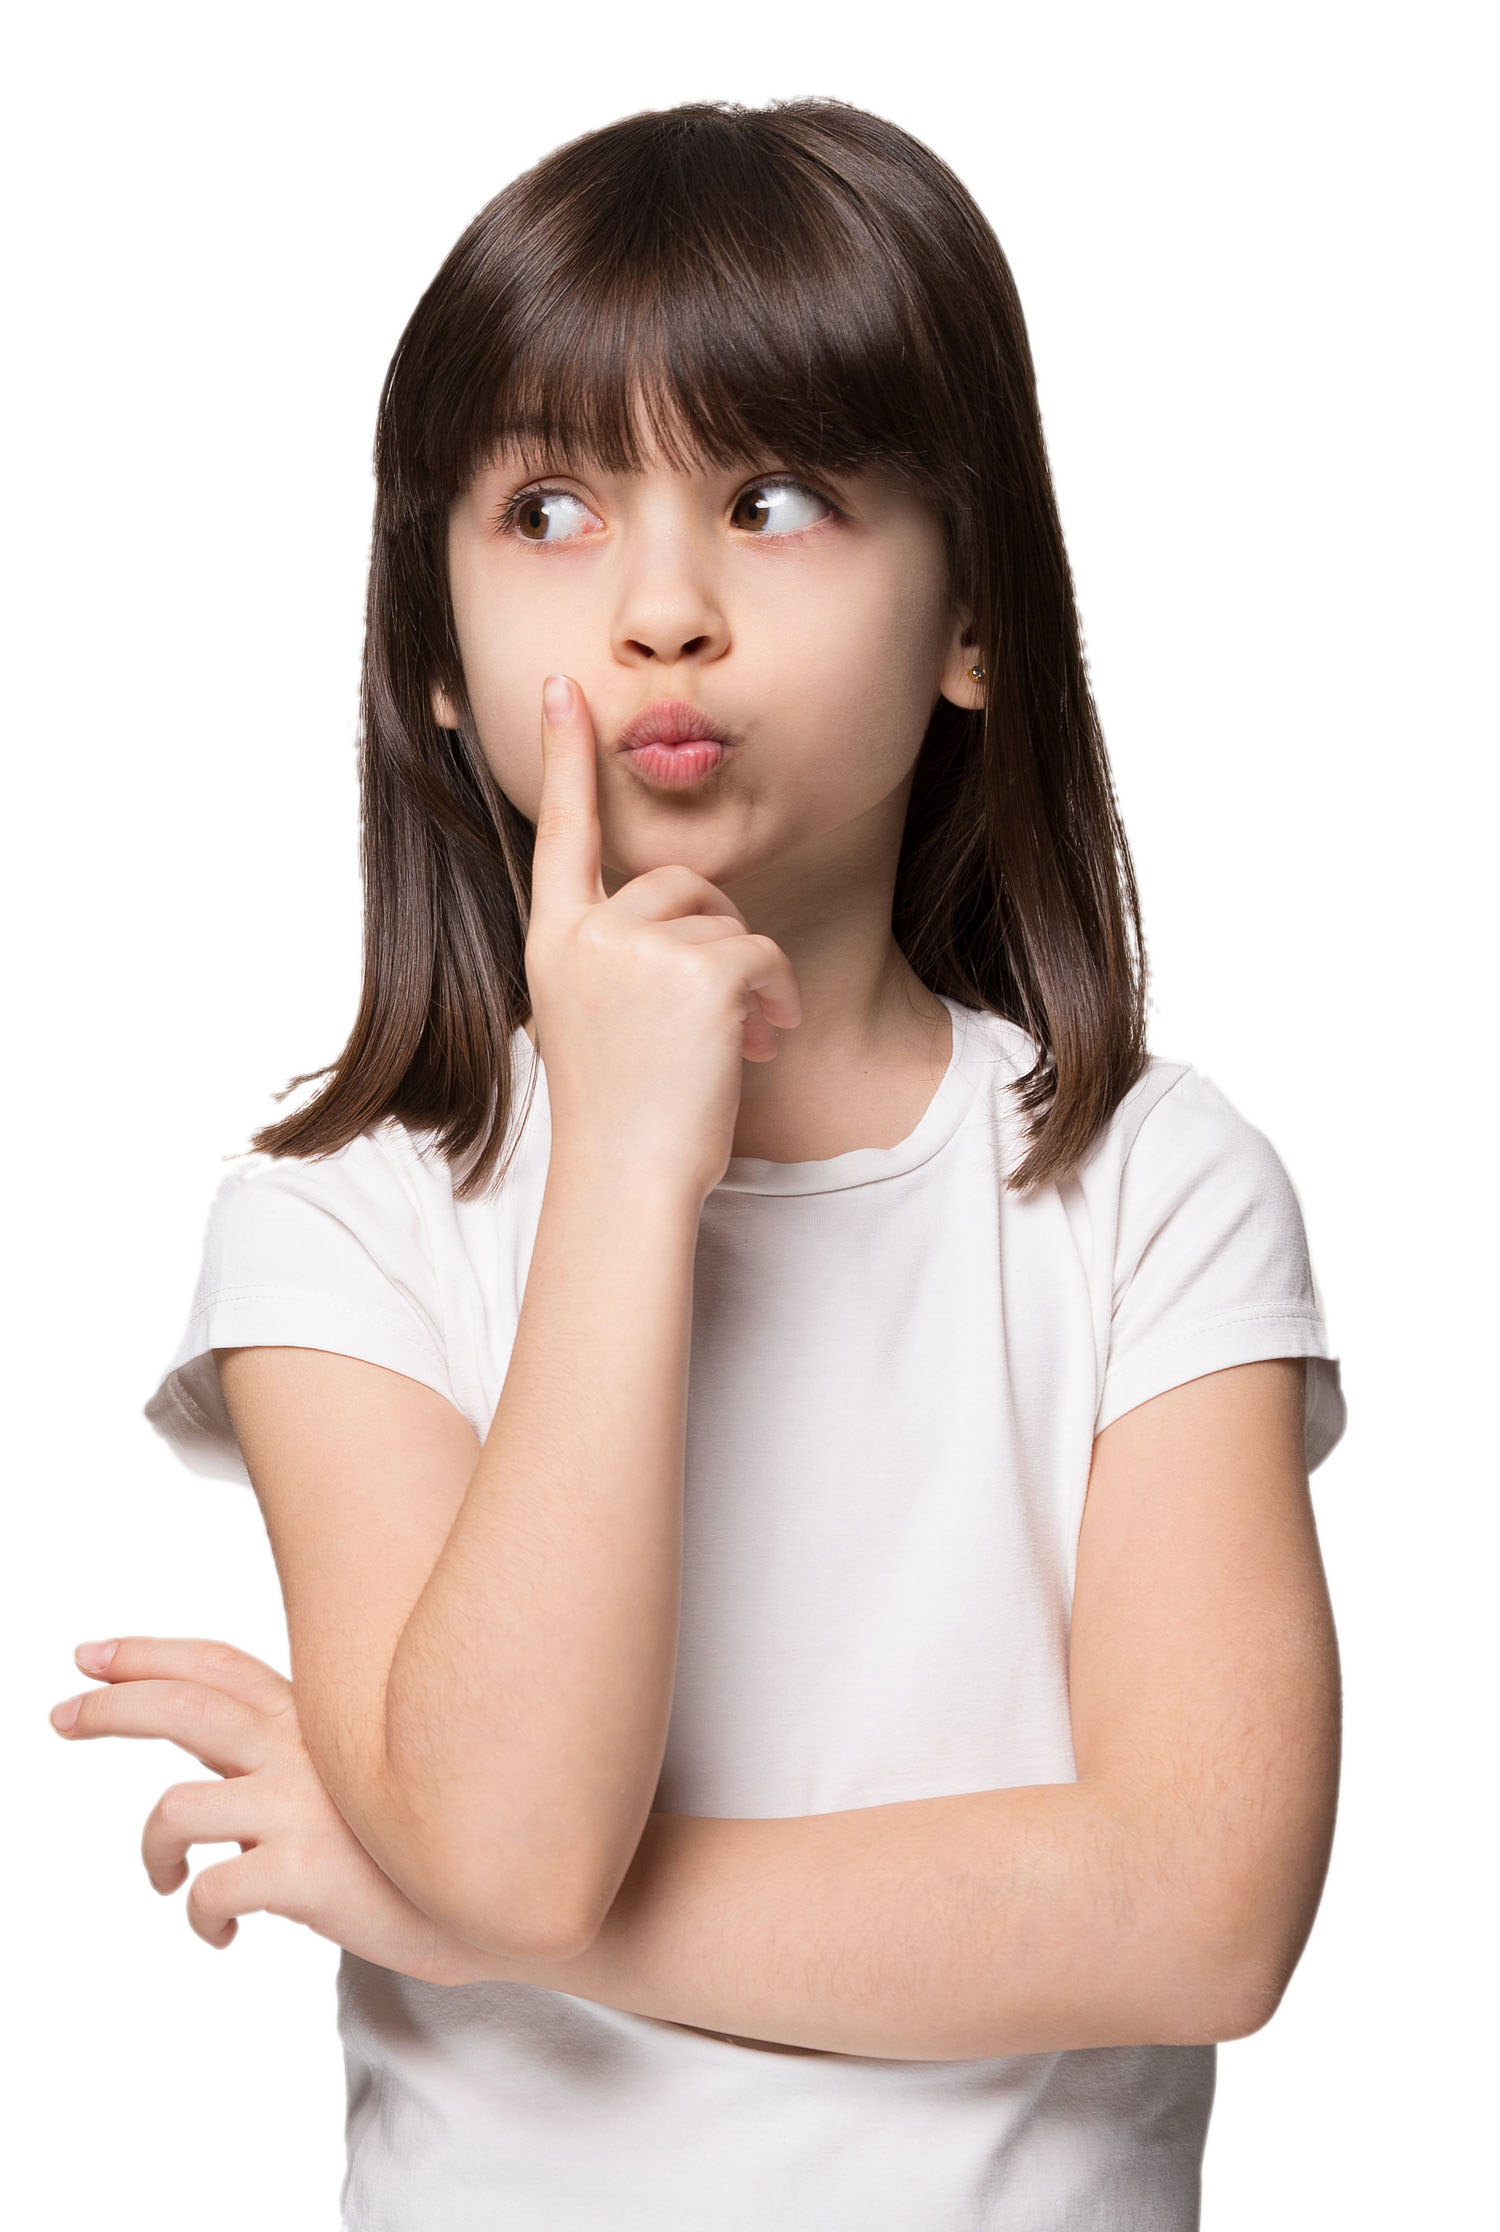 Thoughtful little girl six years old daughter look away on copy space thinking isolated on grey beige background, funny kid pout lips hold finger near mouth conceived some kind of prank, concept image